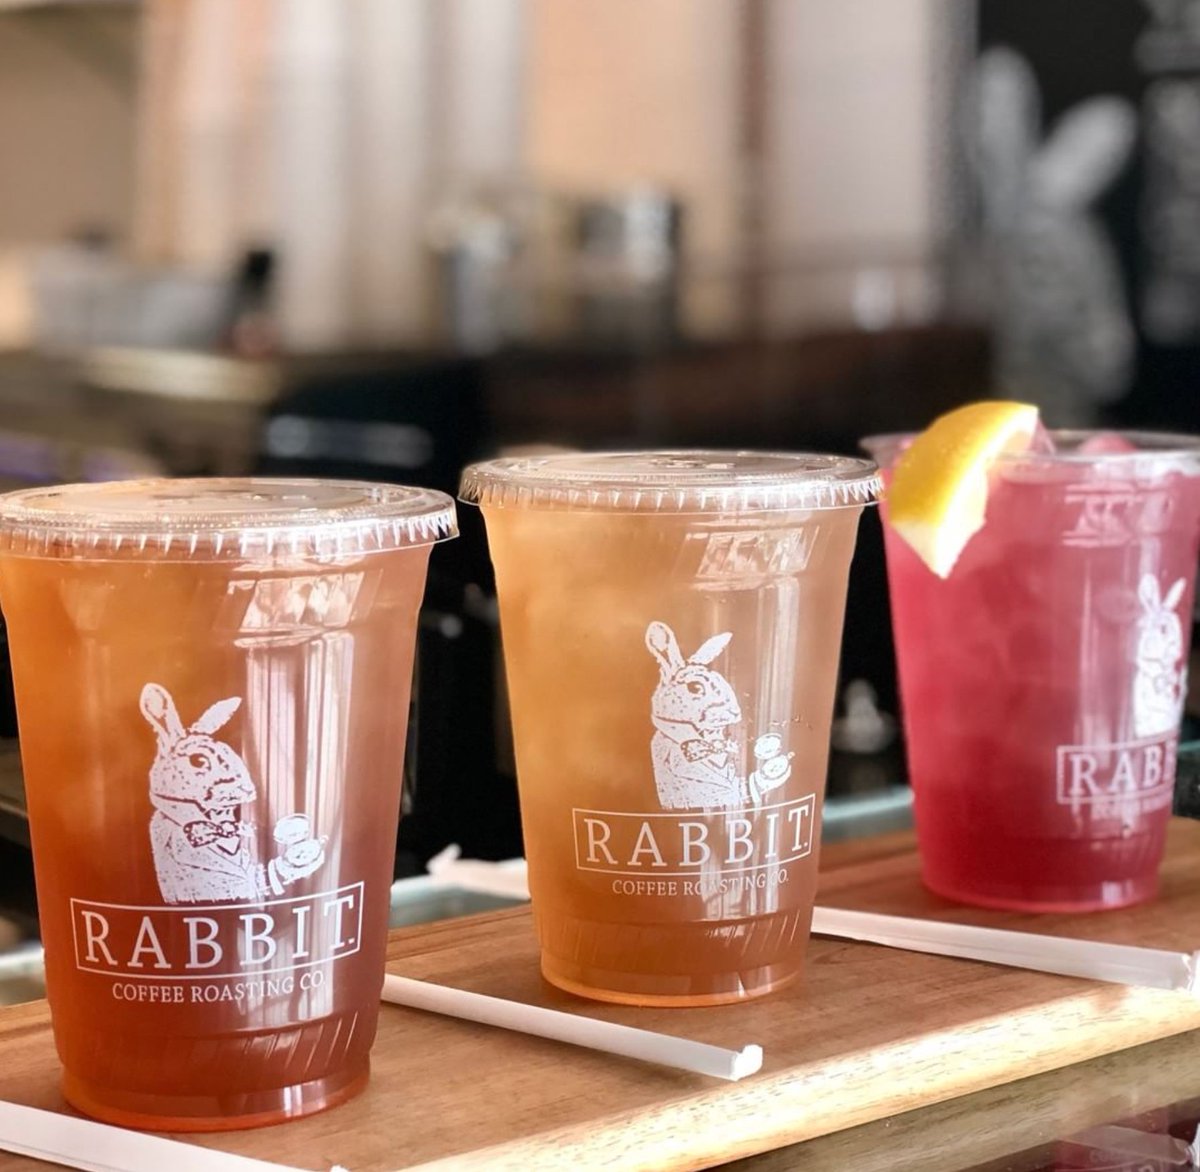 Summer will be here before we know it, but luckily @rabbitroasting already has us covered with an oasis of iced tea options. From left to right: Iced Jasmine + Black Tea, Iced Mango Passion Fruit, and Iced Pomegranate Raspberry. And that's just the beginning. Get guzzling, WPB!